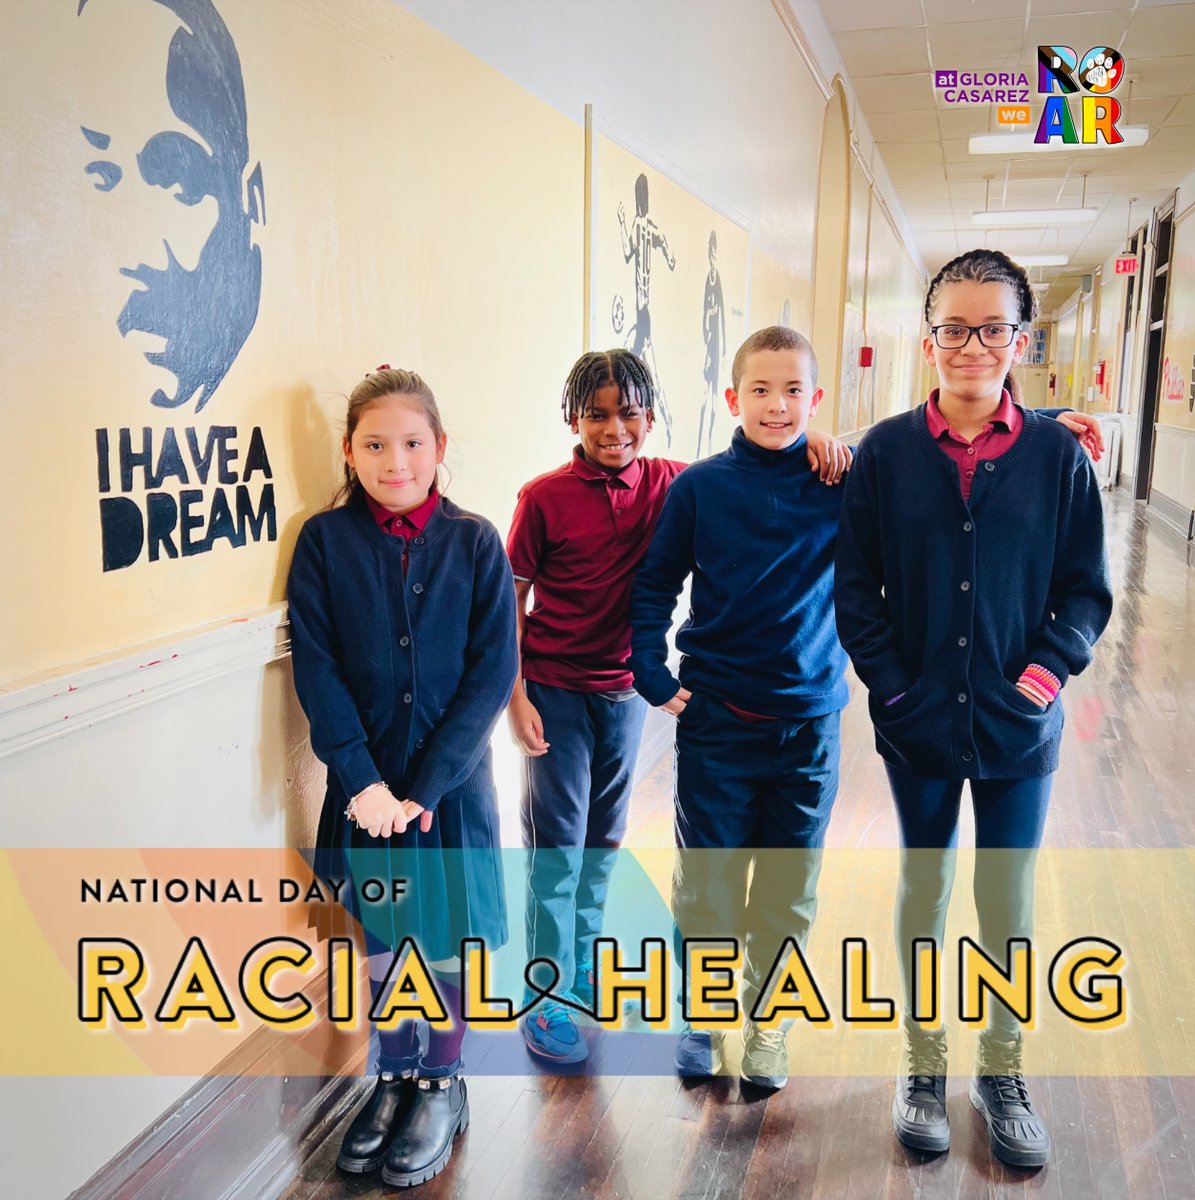 Today we honor #NationalDayofRacialHealing 

There are more than 170 events in more than 30 states happening, locally and virtually. There’s still time to find an event near you: wkkf.co/8yy5

@PHLschools @watlington_sr @DrRLajara @EvelynNunez608 @WK_Kellogg_Fdn